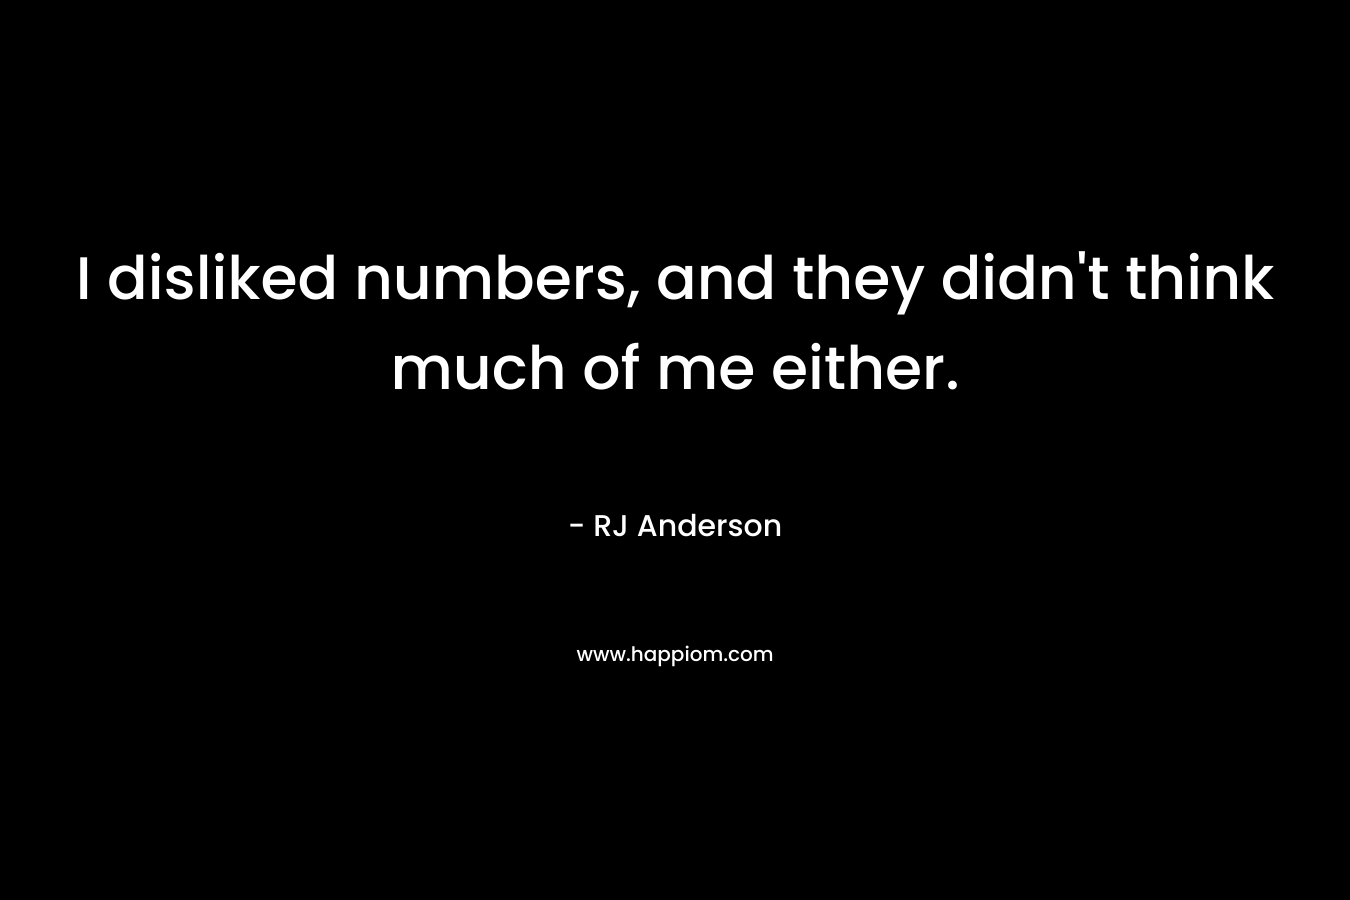 I disliked numbers, and they didn’t think much of me either. – RJ Anderson